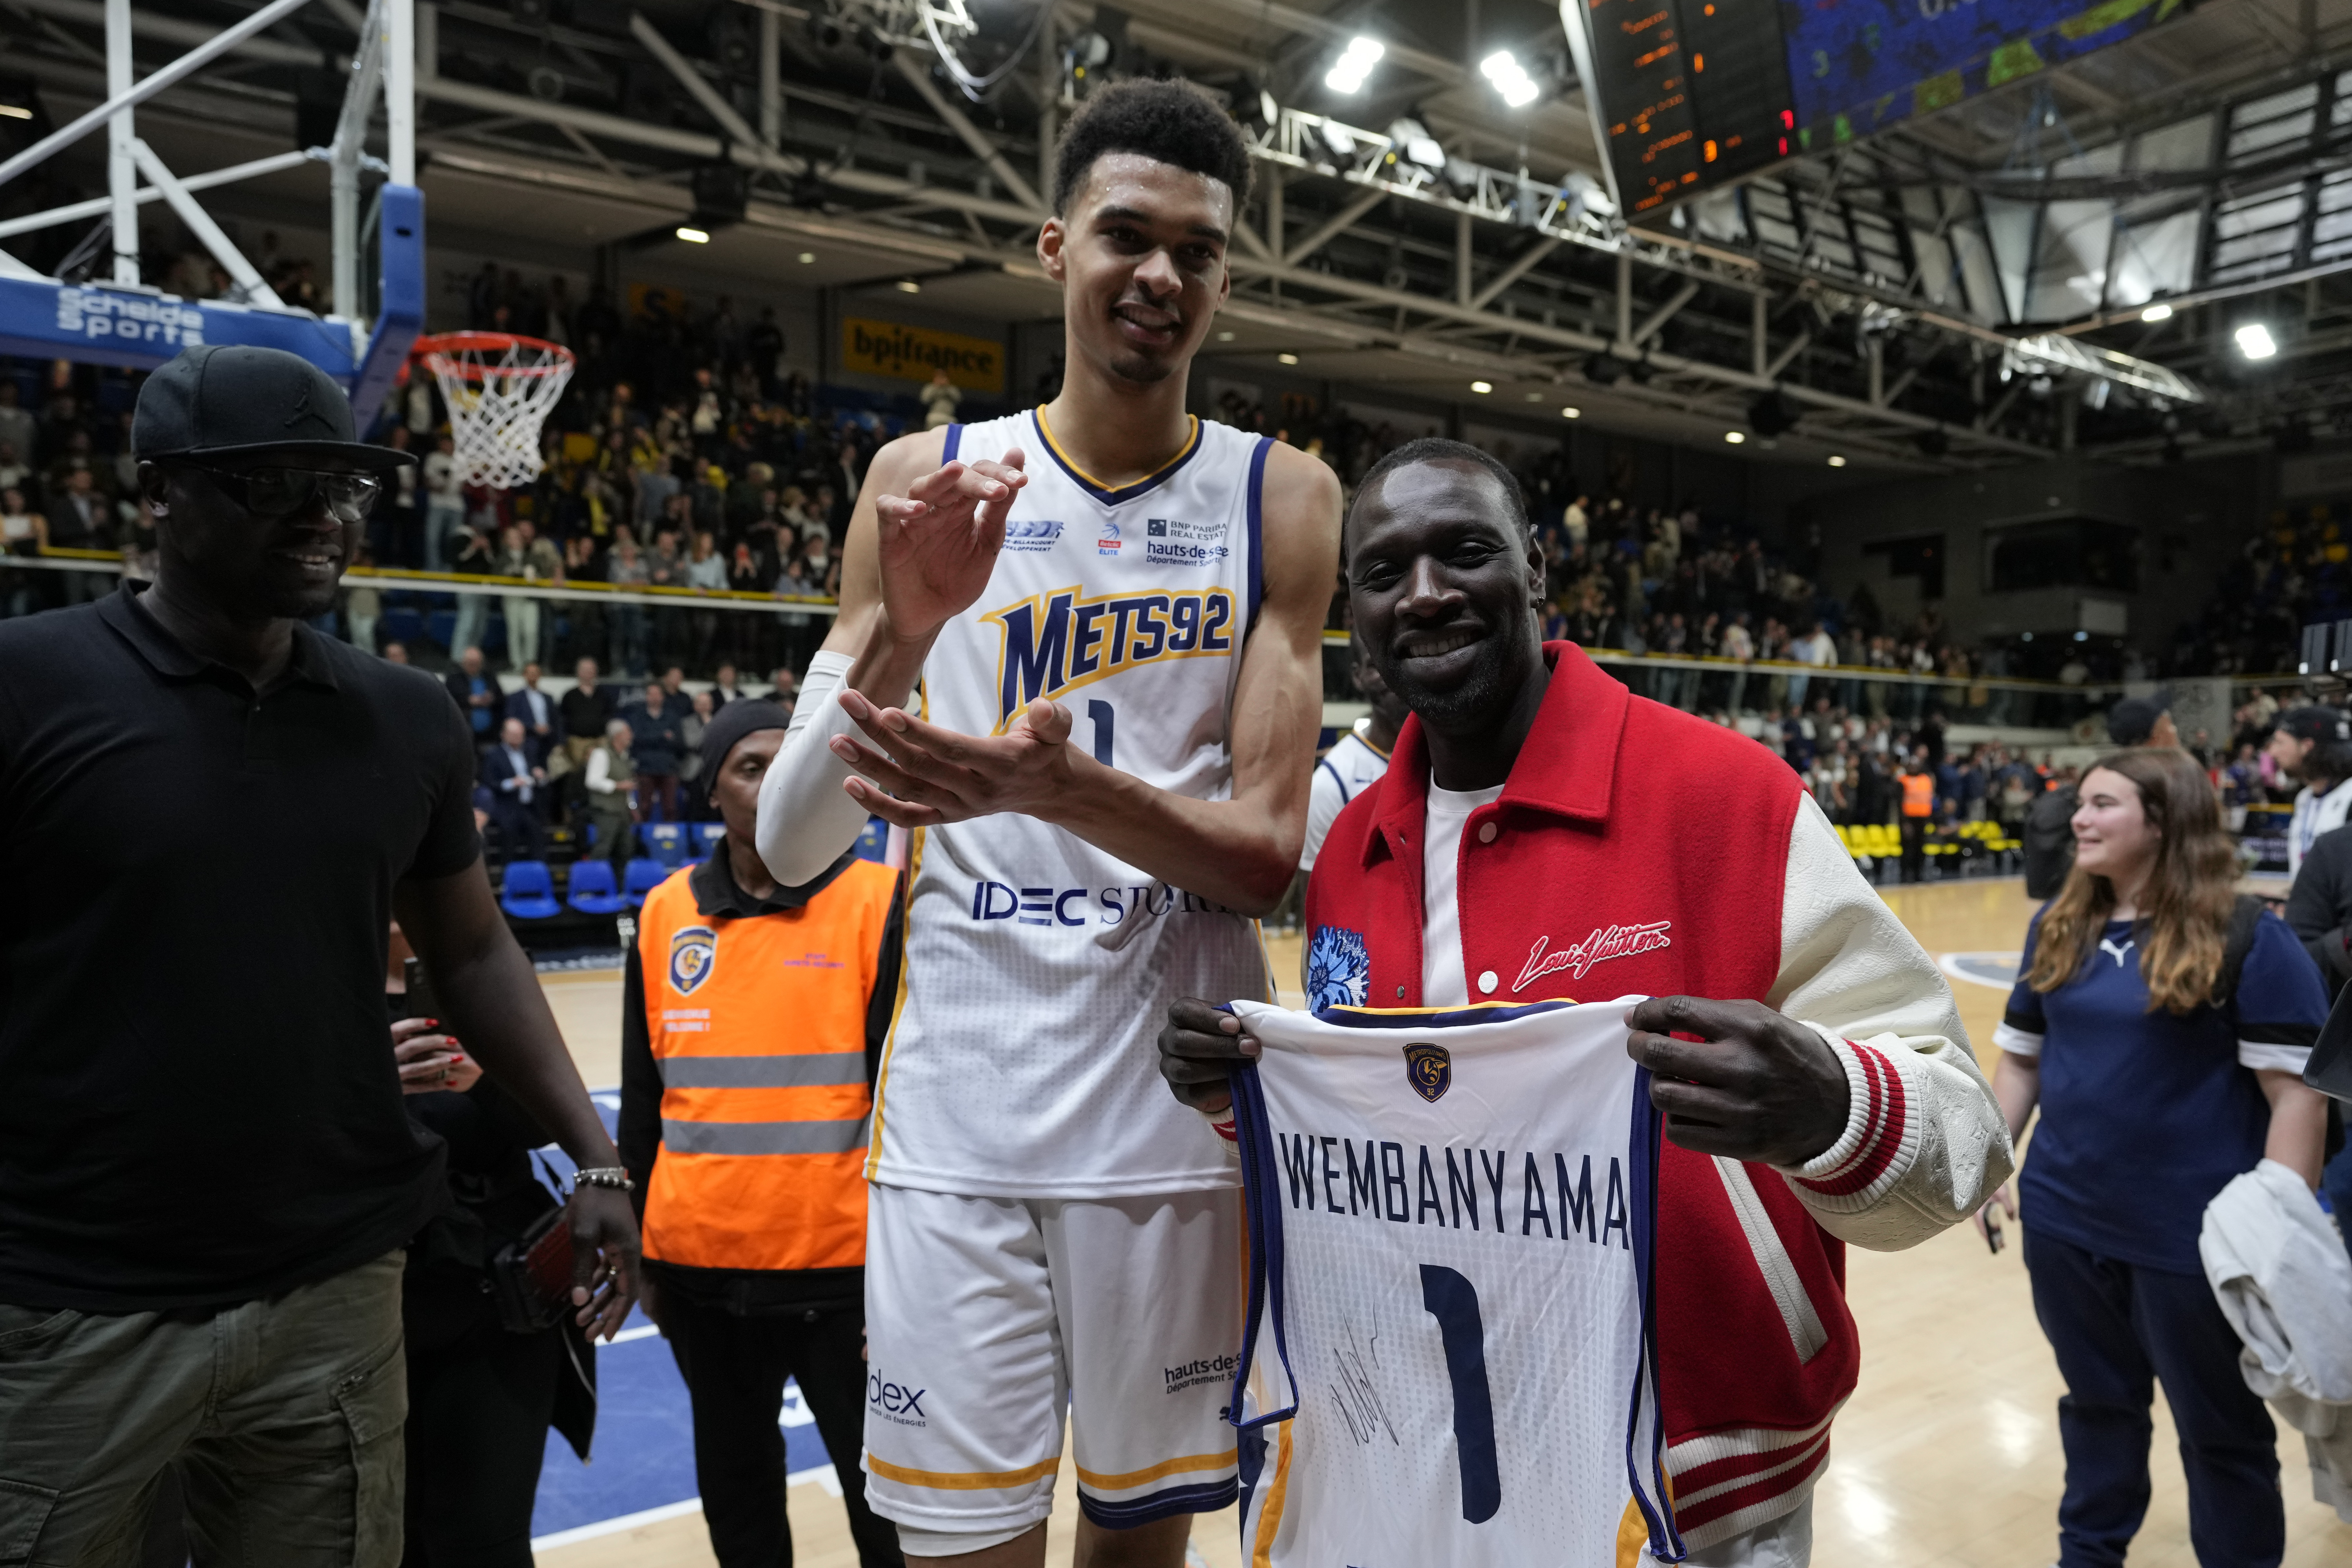 Is French High School Basketball Player Victor Wembanyama the Next NBA  Superstar?, by Andrew Martin, SportsRaid